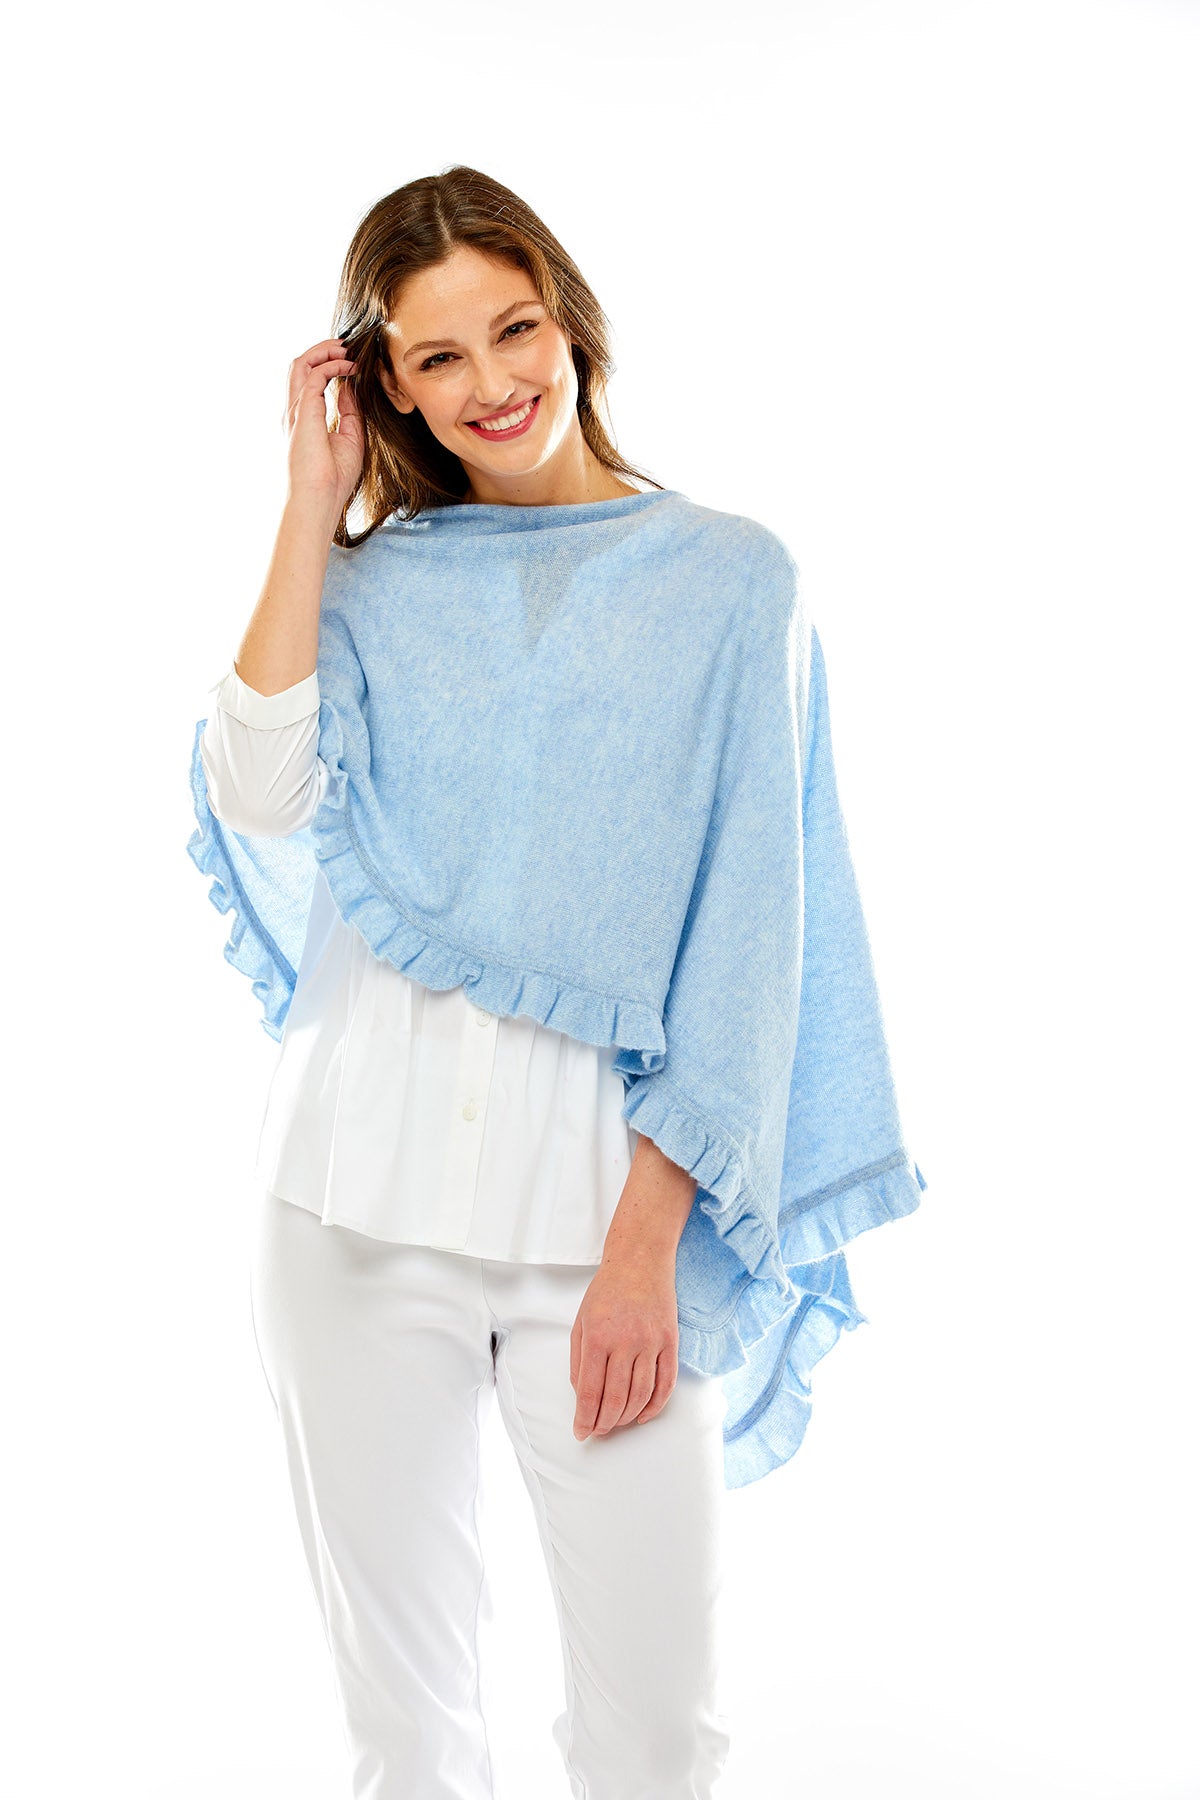 Woman in blue poncho